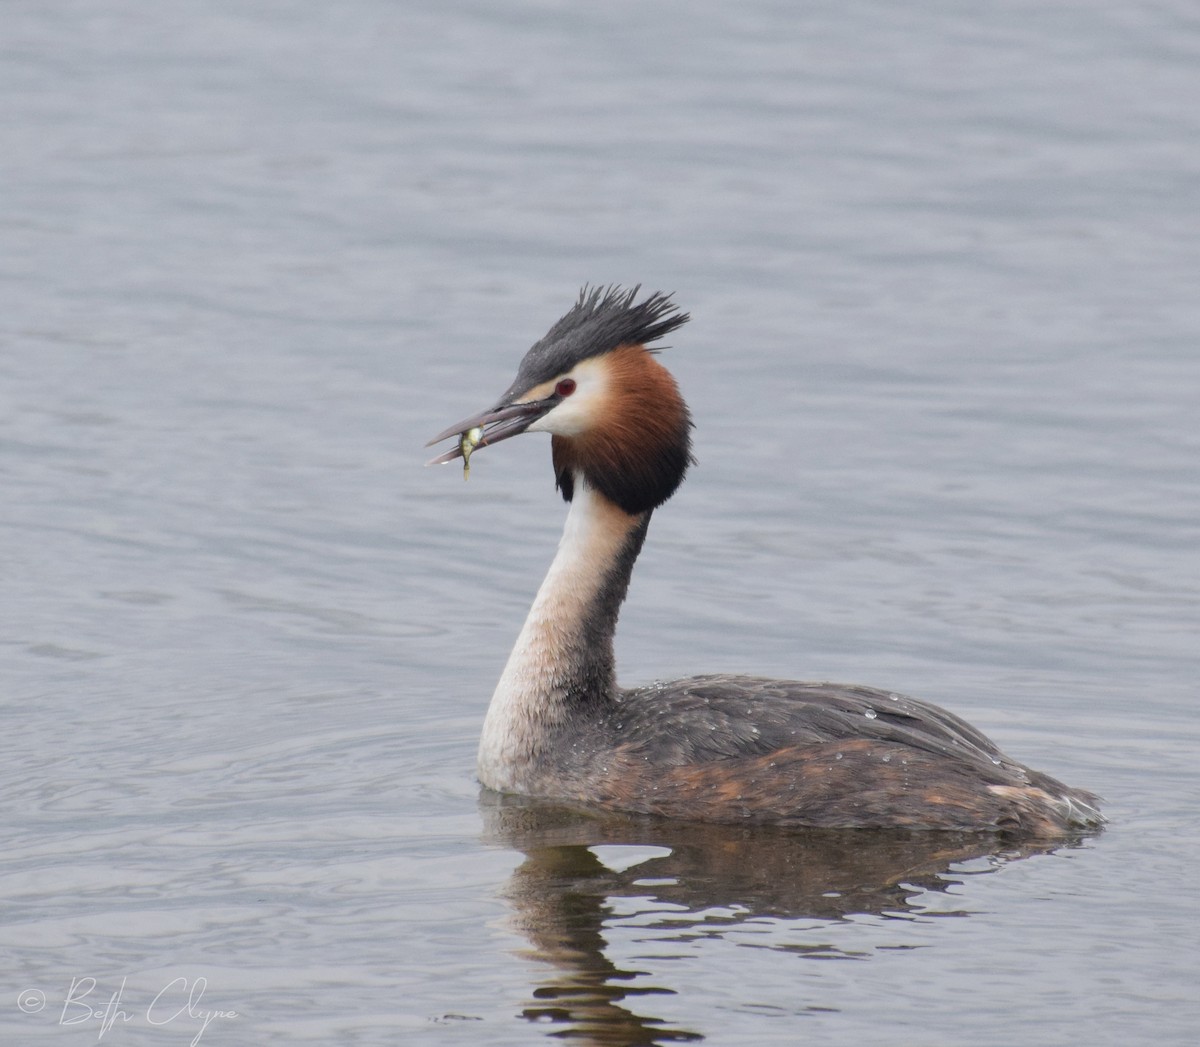 Great Crested Grebe - Bethan Clyne